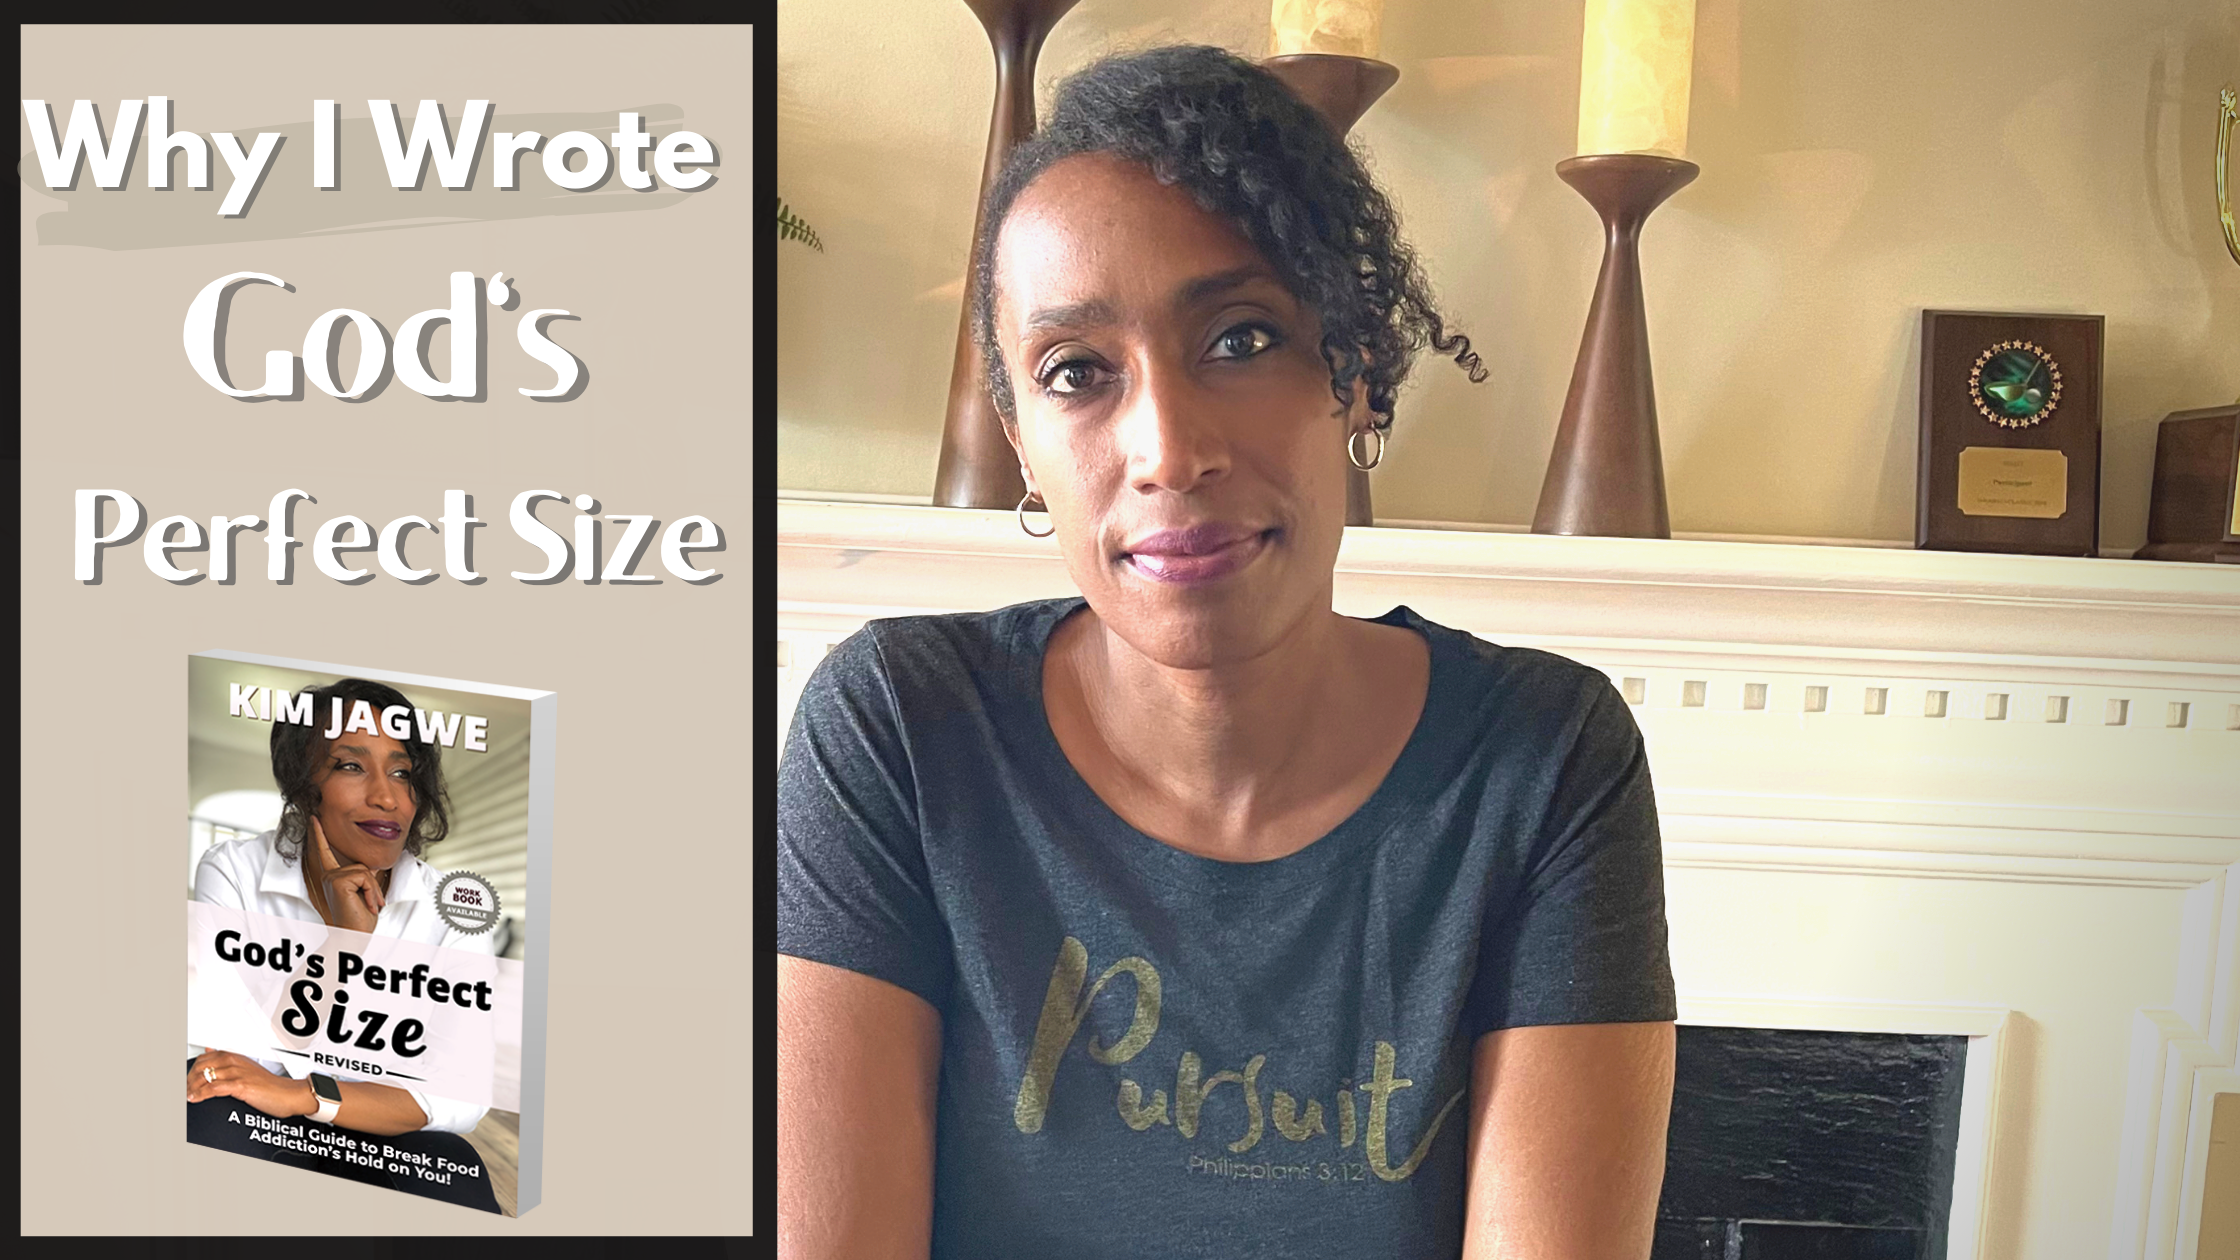 Why I wrote God’s Perfect Size